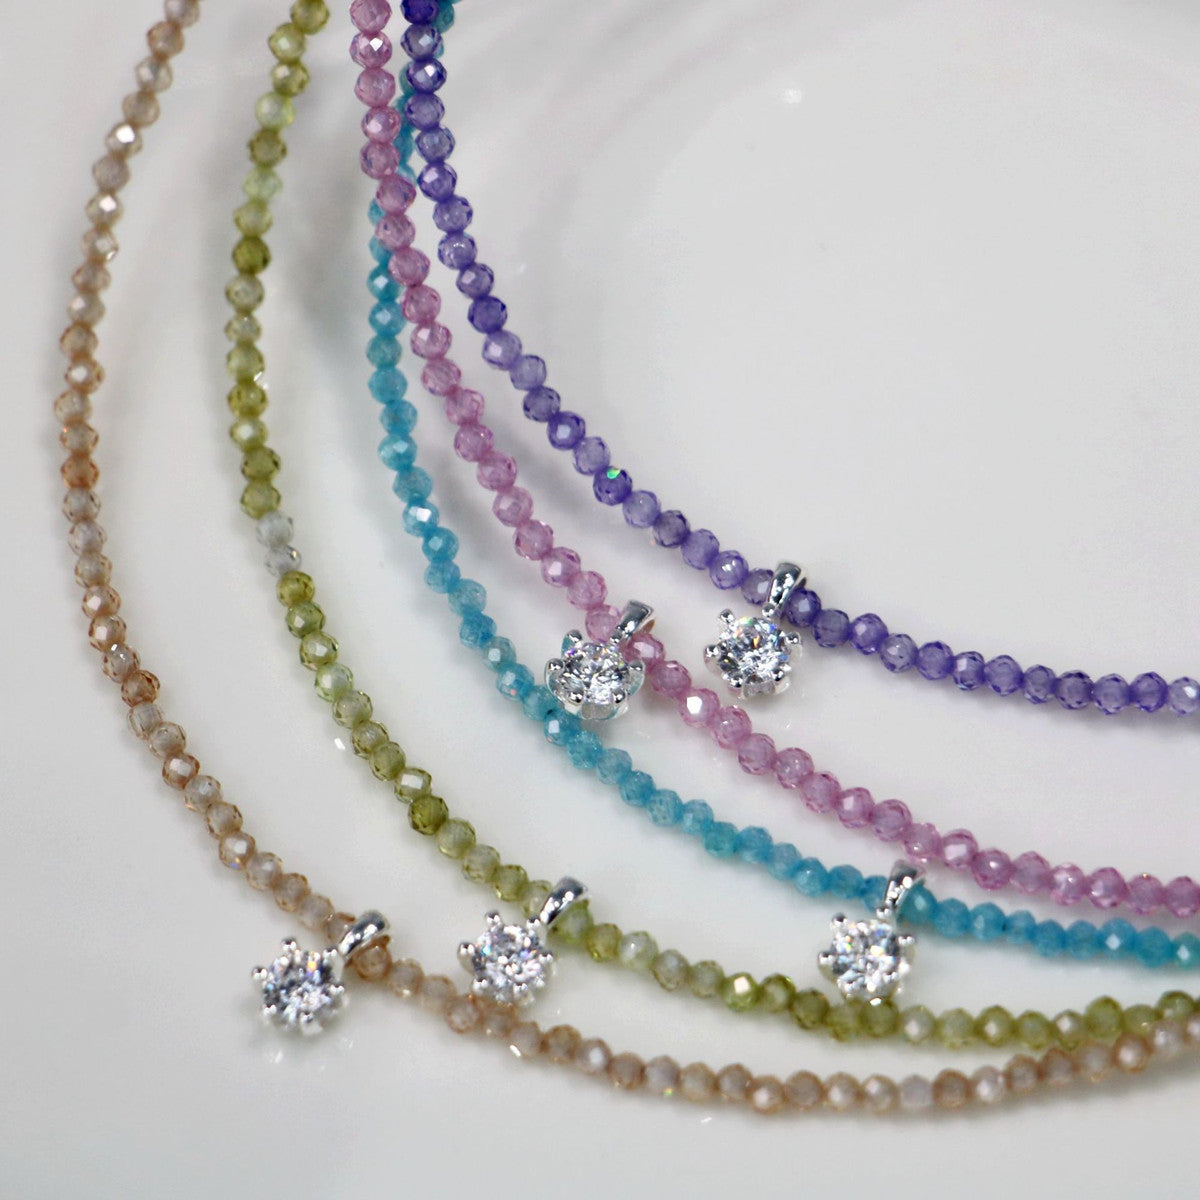 16" Skinny Rainbow Zircon Faceted Beaded Necklace Zircon Necklace, S925 Sterling Silver Summer Jewelry Necklace AL962